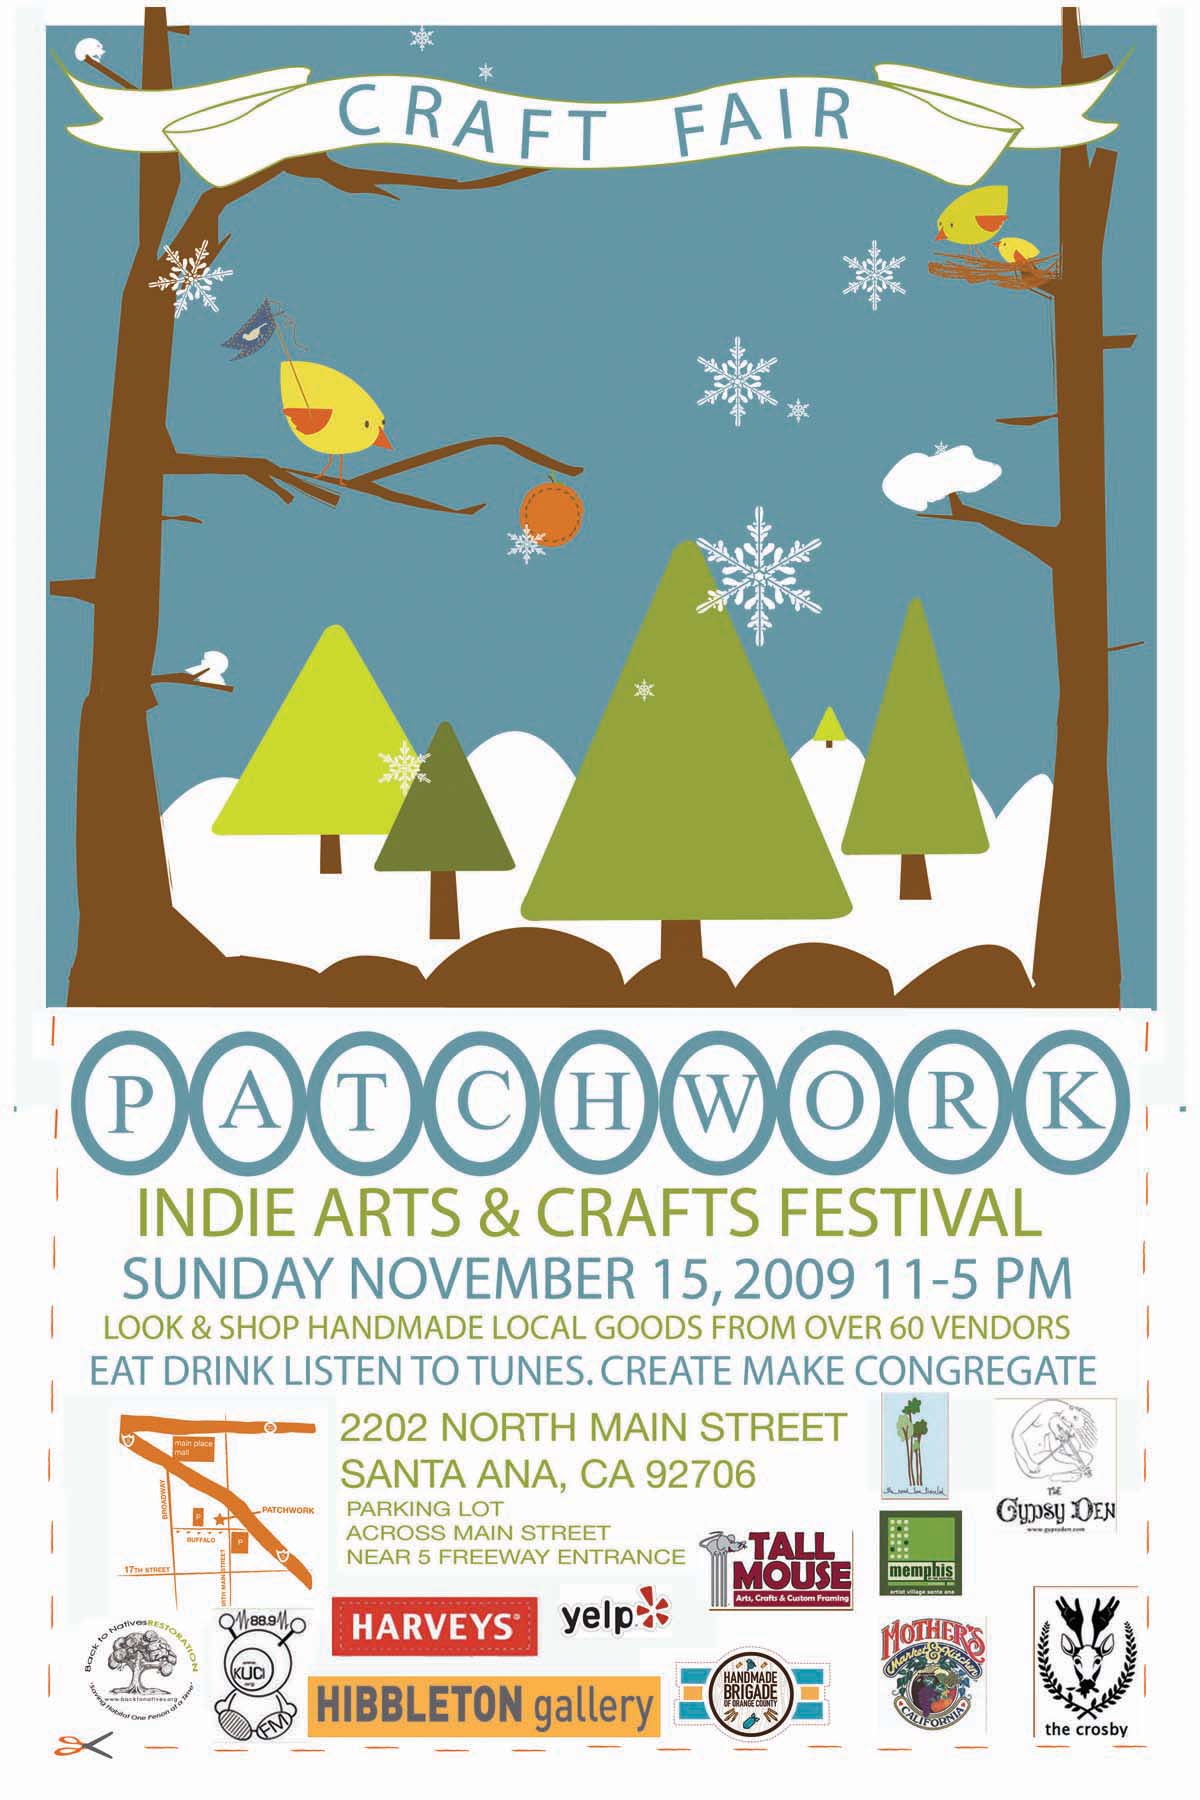 patchwork show: indie craft fair posters - Dear Handmade Life